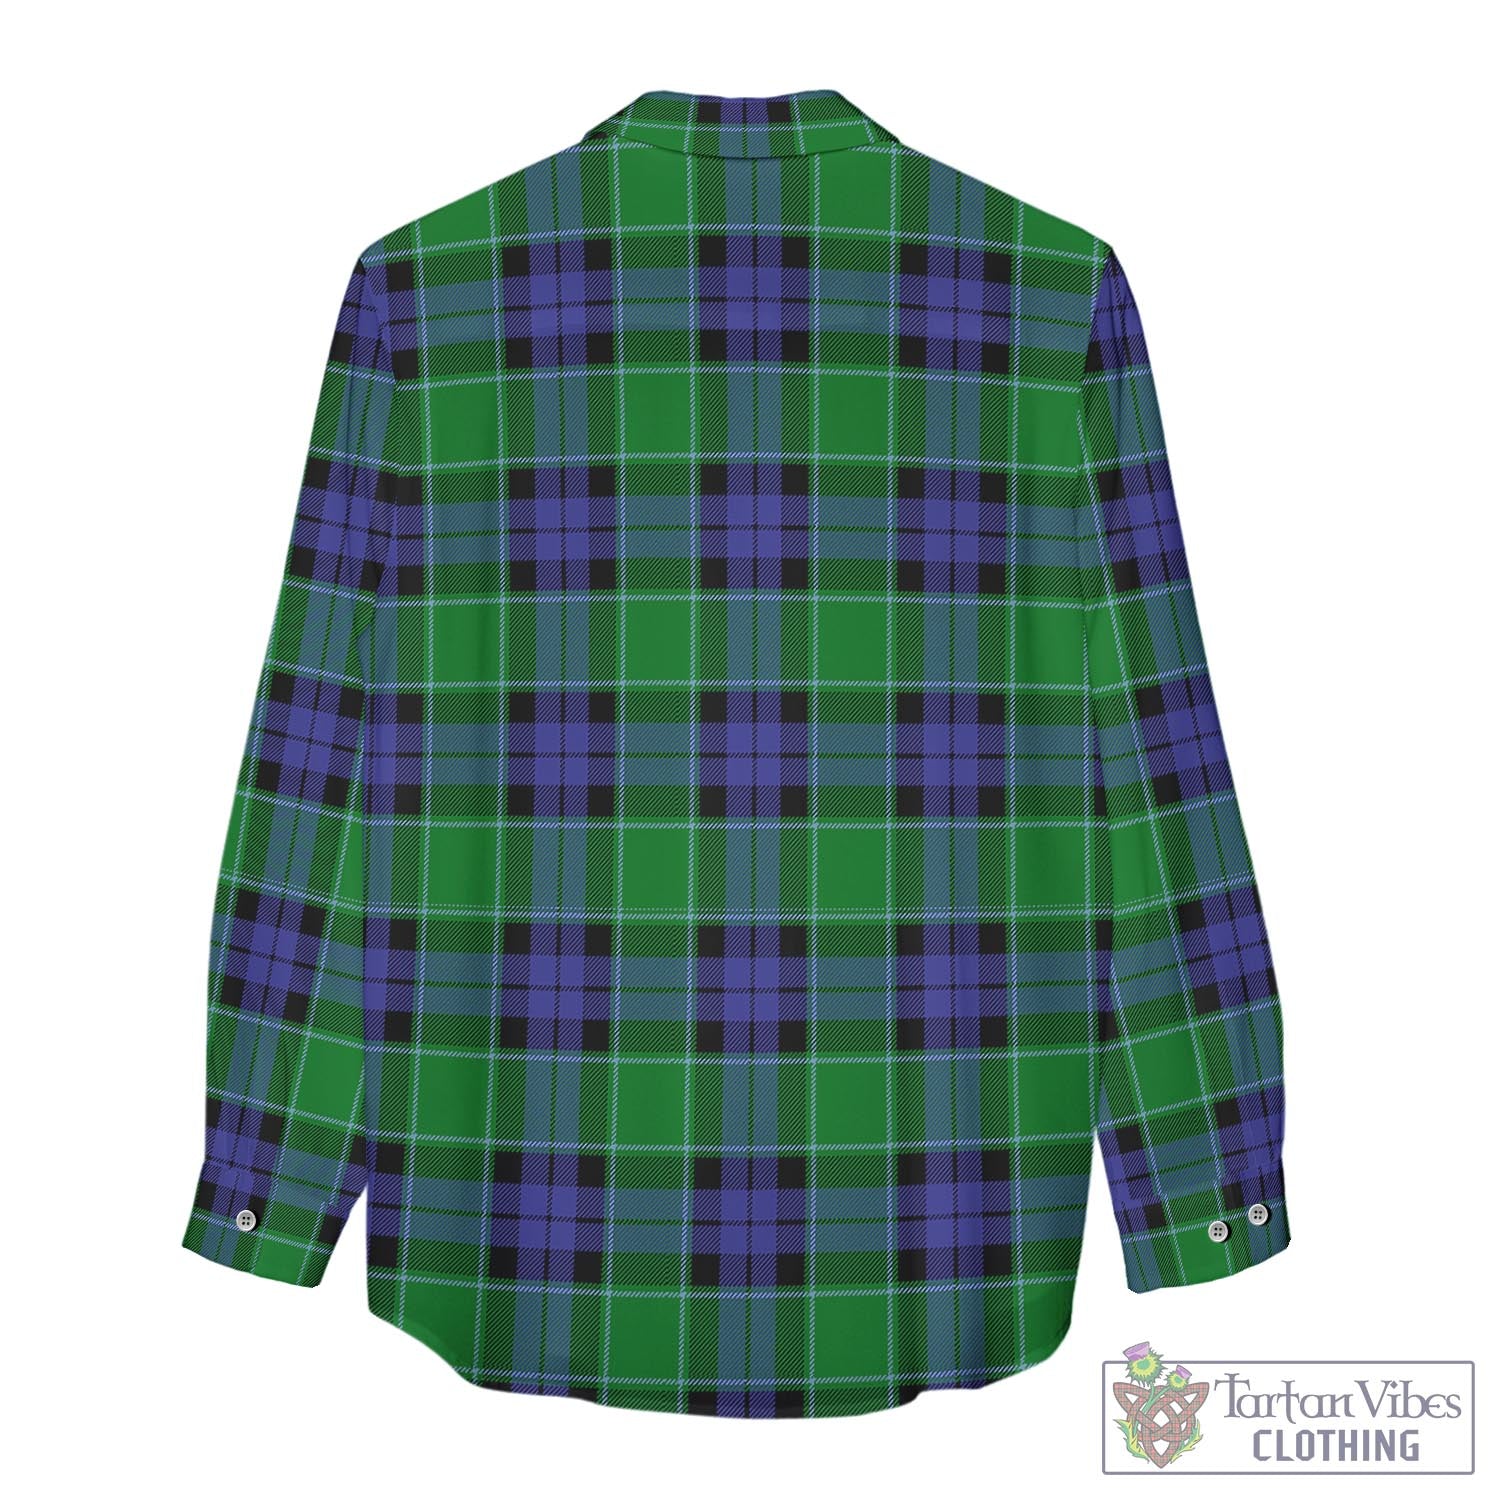 Tartan Vibes Clothing Monteith Tartan Womens Casual Shirt with Family Crest